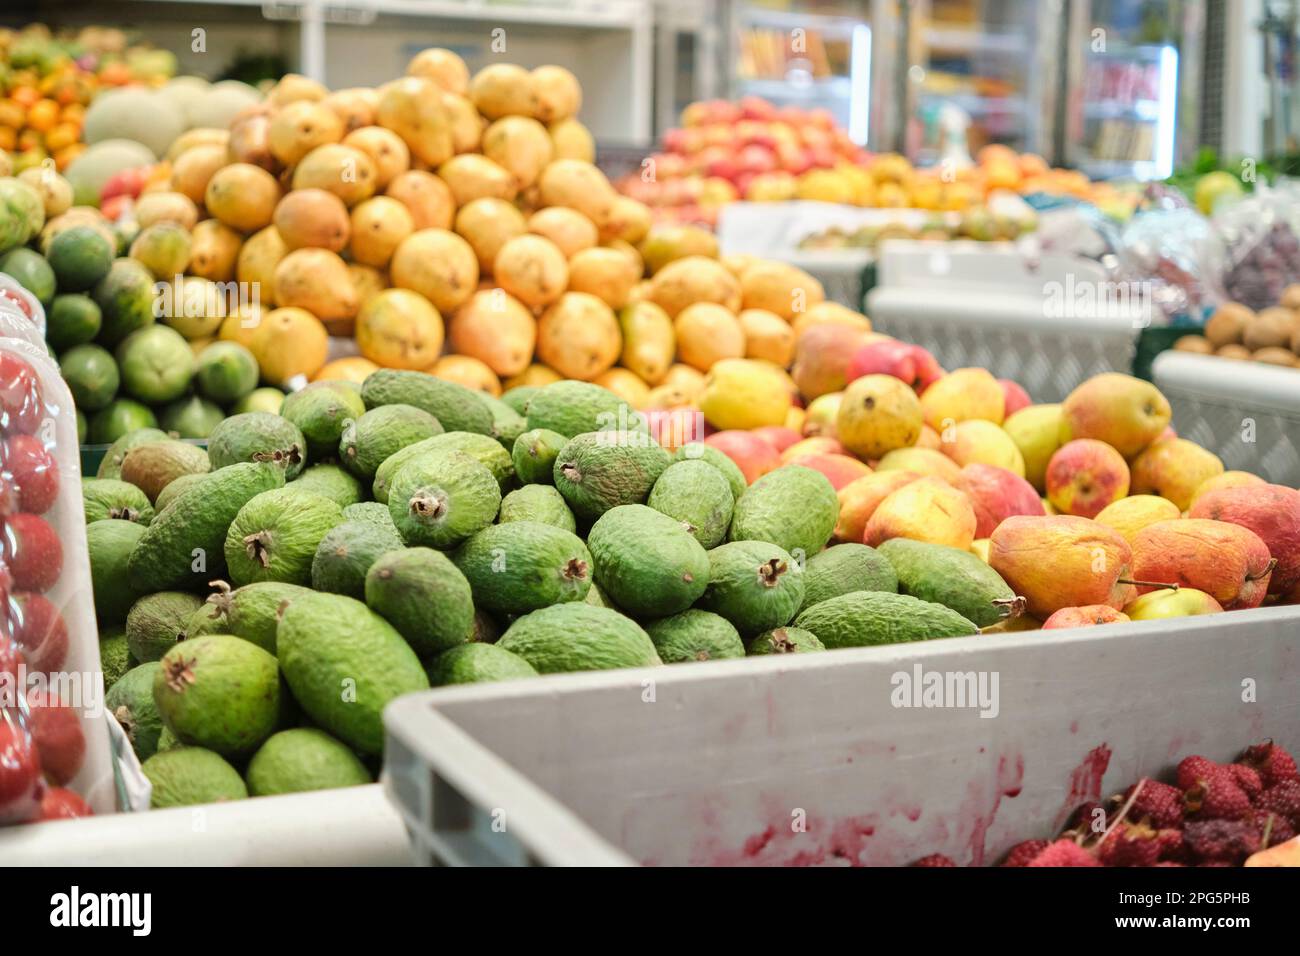 Piles of feijoas, apples and guavas in the fruit section of a market. Stock Photo